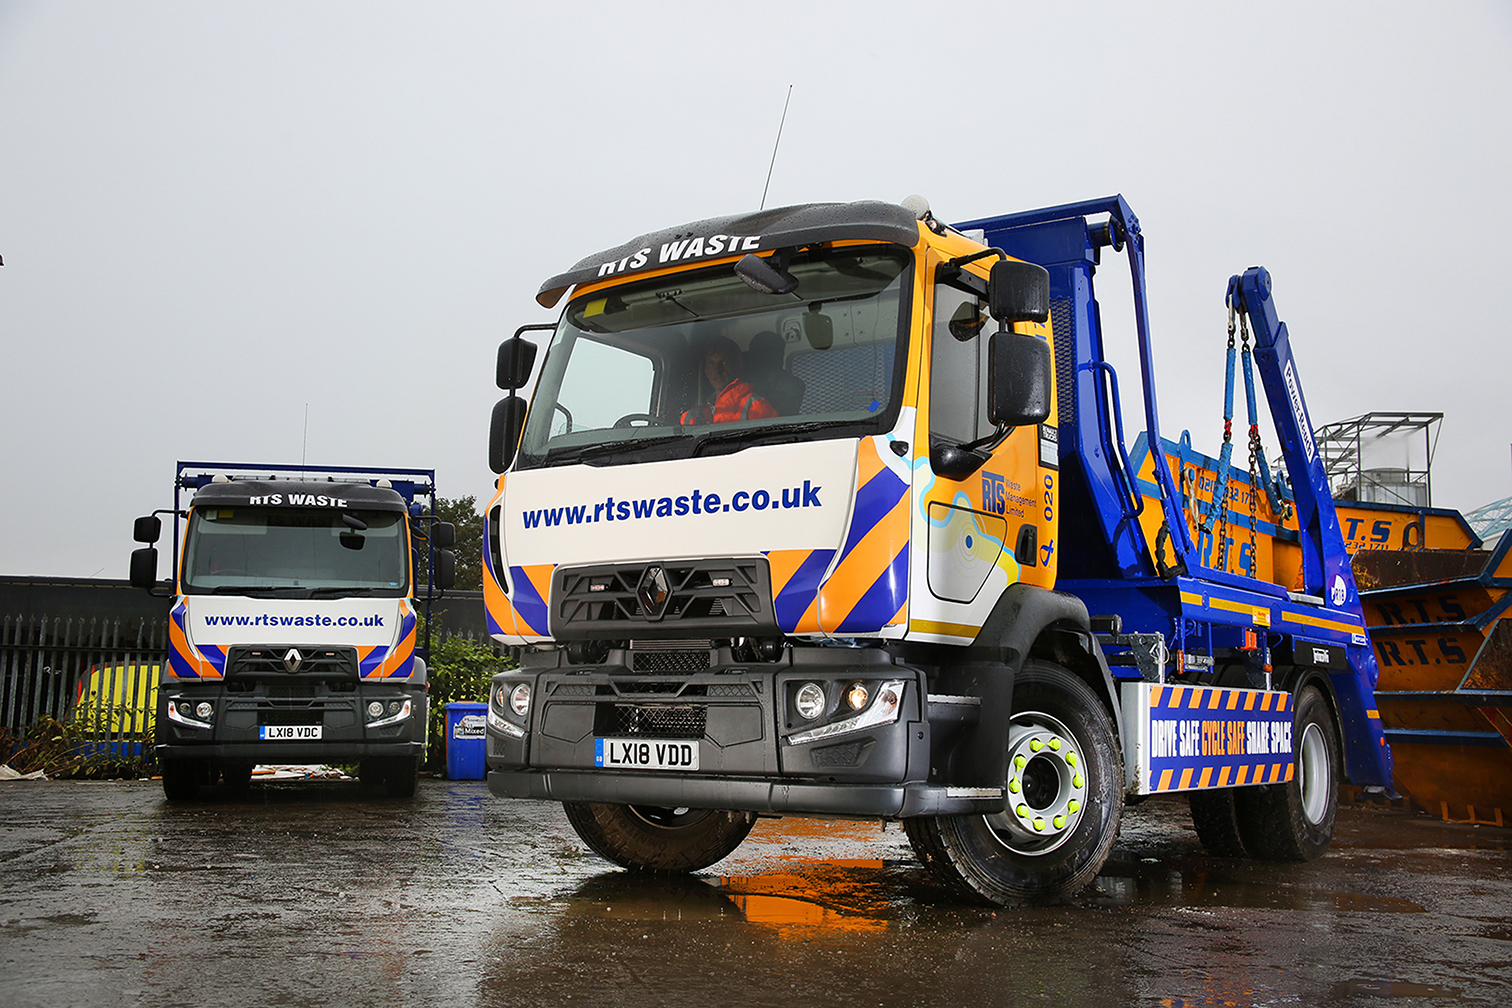 RTS WASTE MANAGEMENT RATES RENAULT TRUCKS ESSEX AS THE BEST